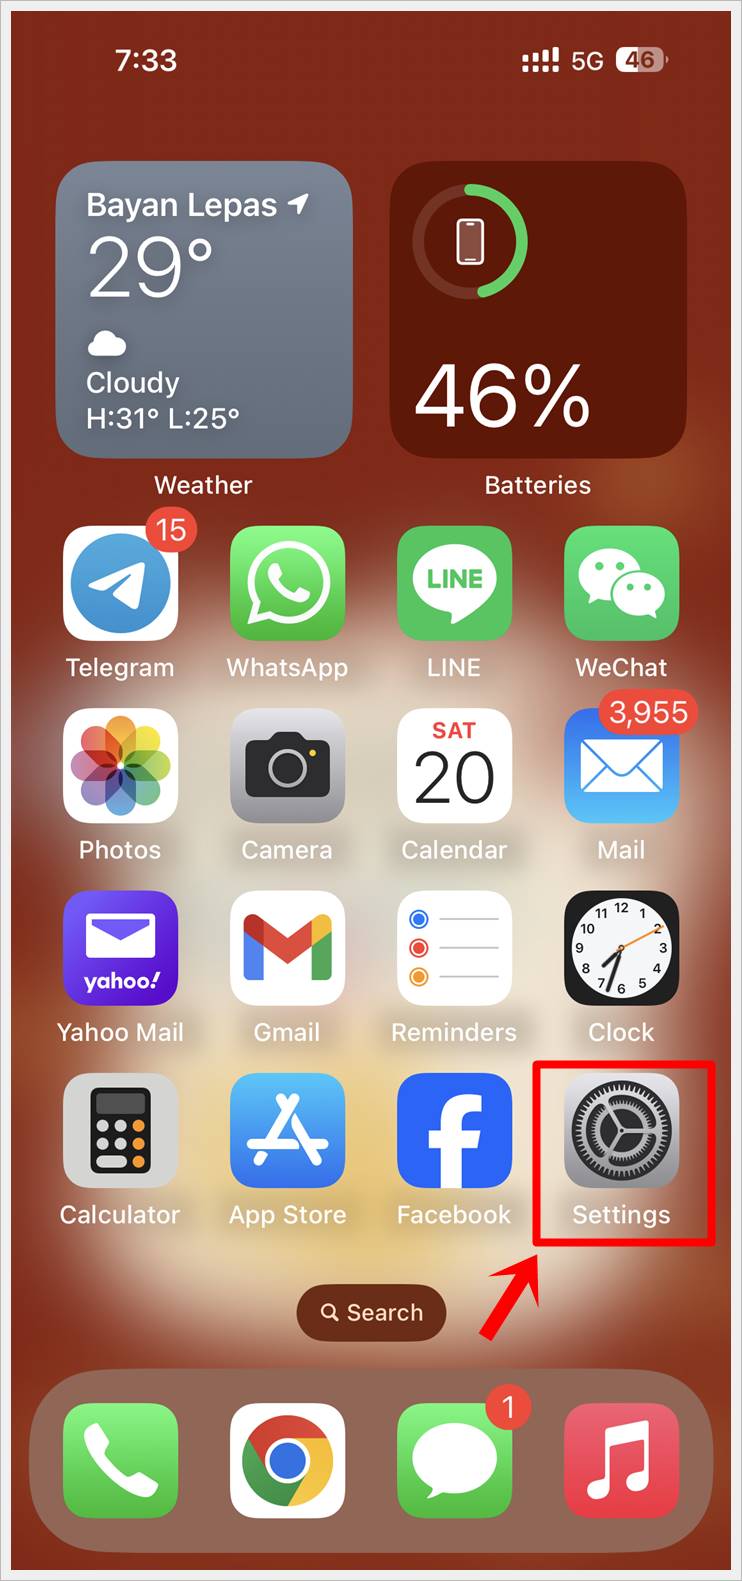 This image shows a screenshot of an iPhone with its 'Settings' icon highlighted.